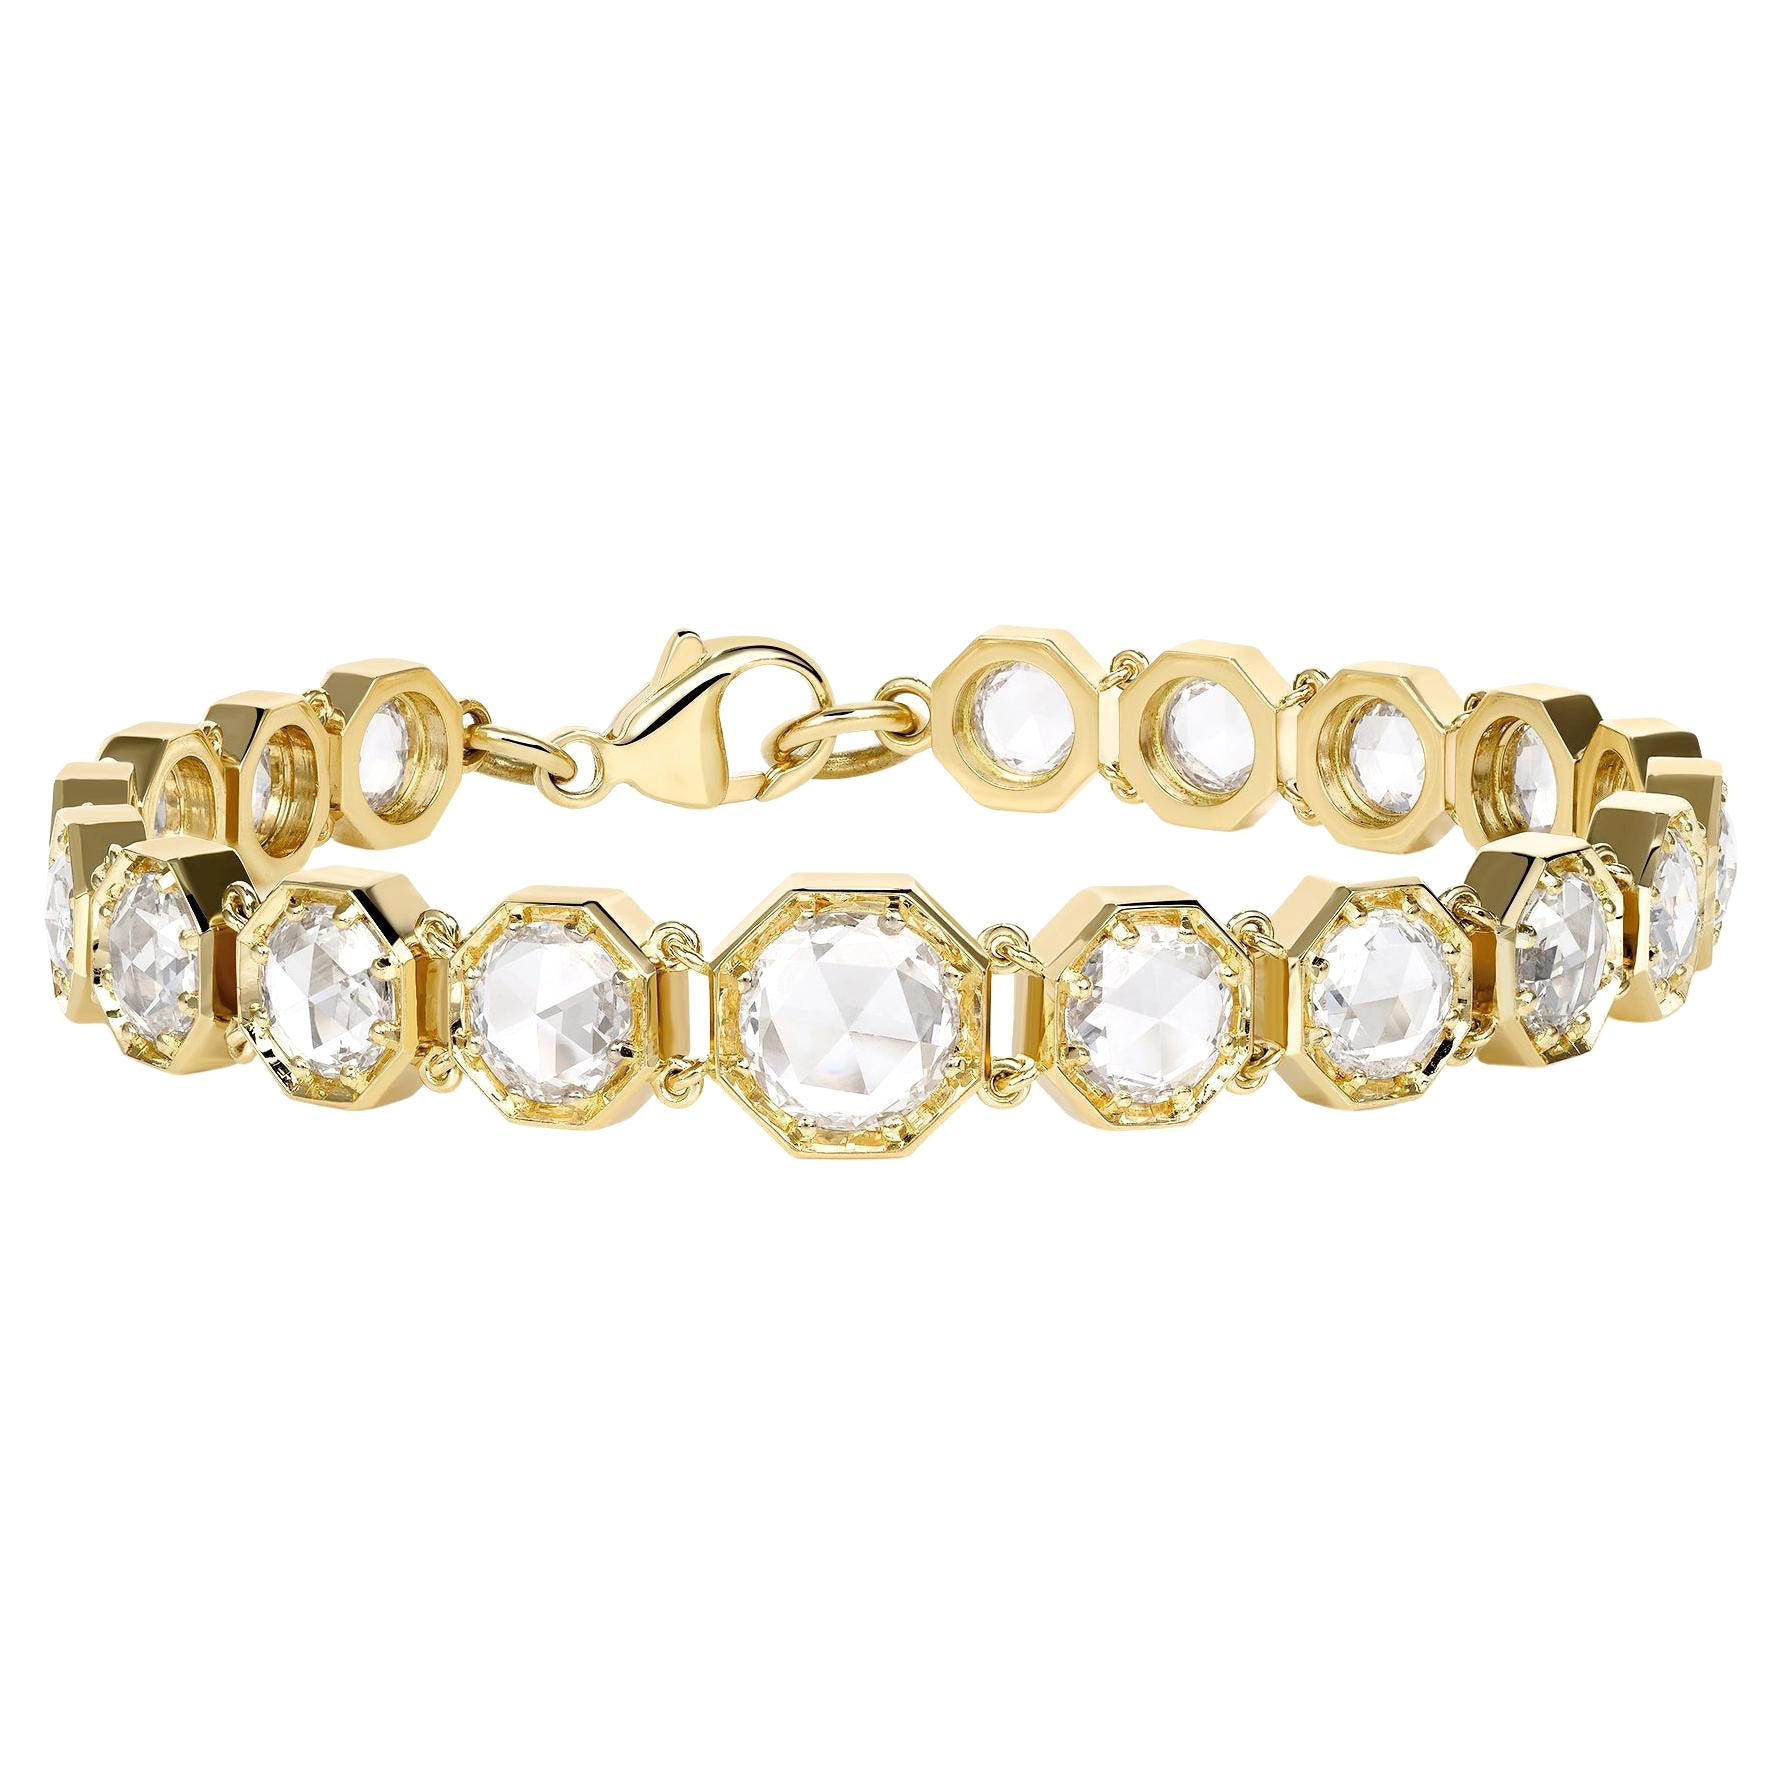 Handcrafted Colby Rose Cut Diamond Bracelet by Single Stone For Sale